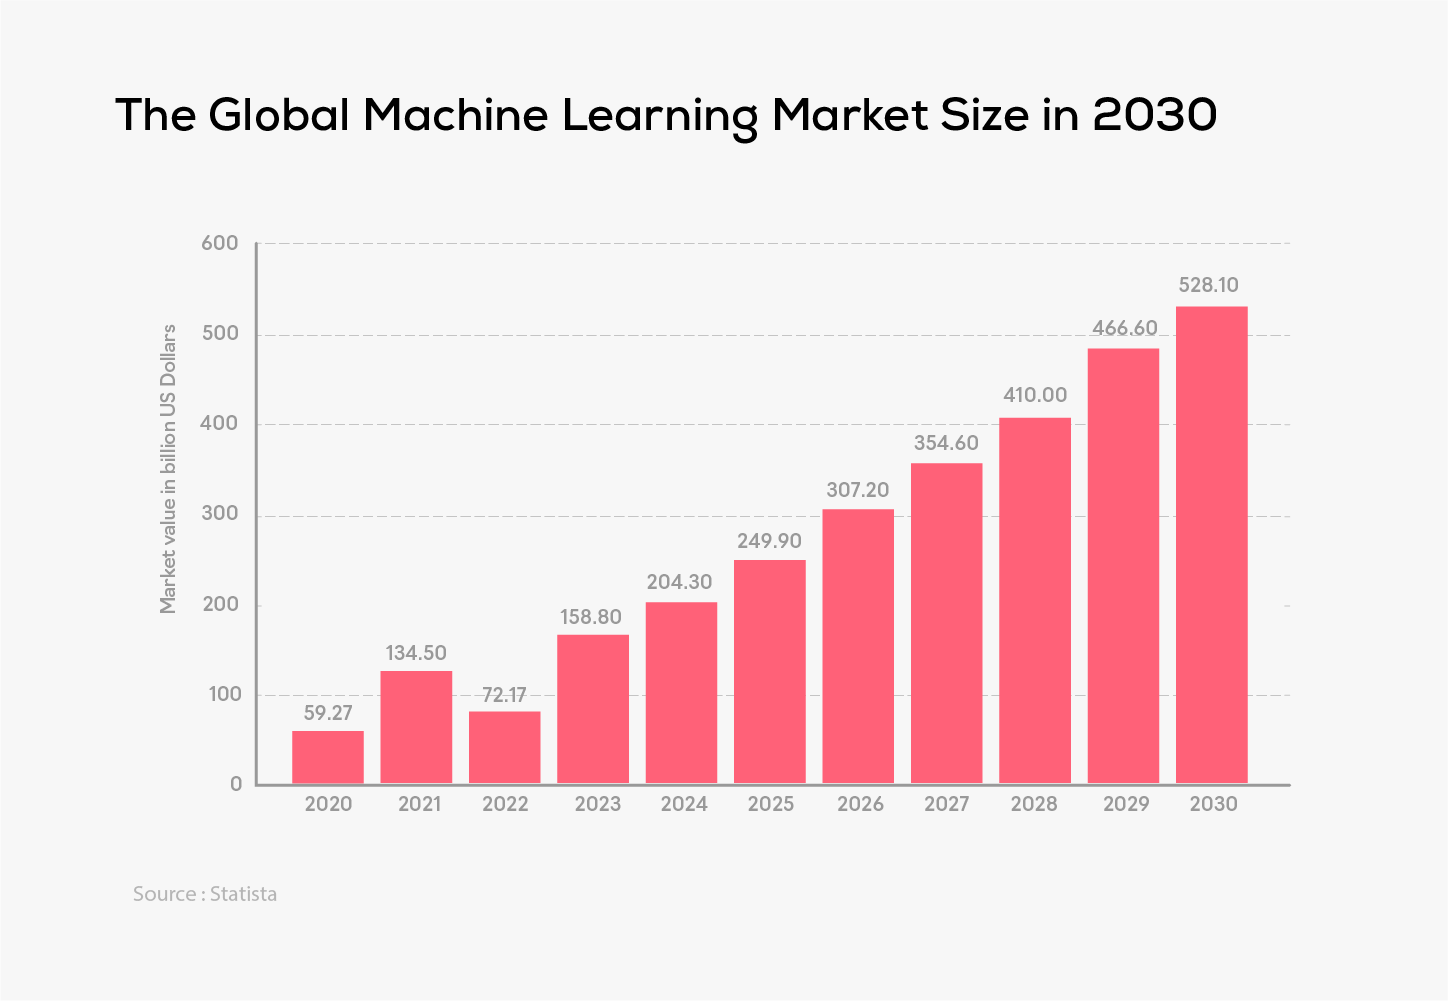 The Global Machine Learning Market Size in 2030